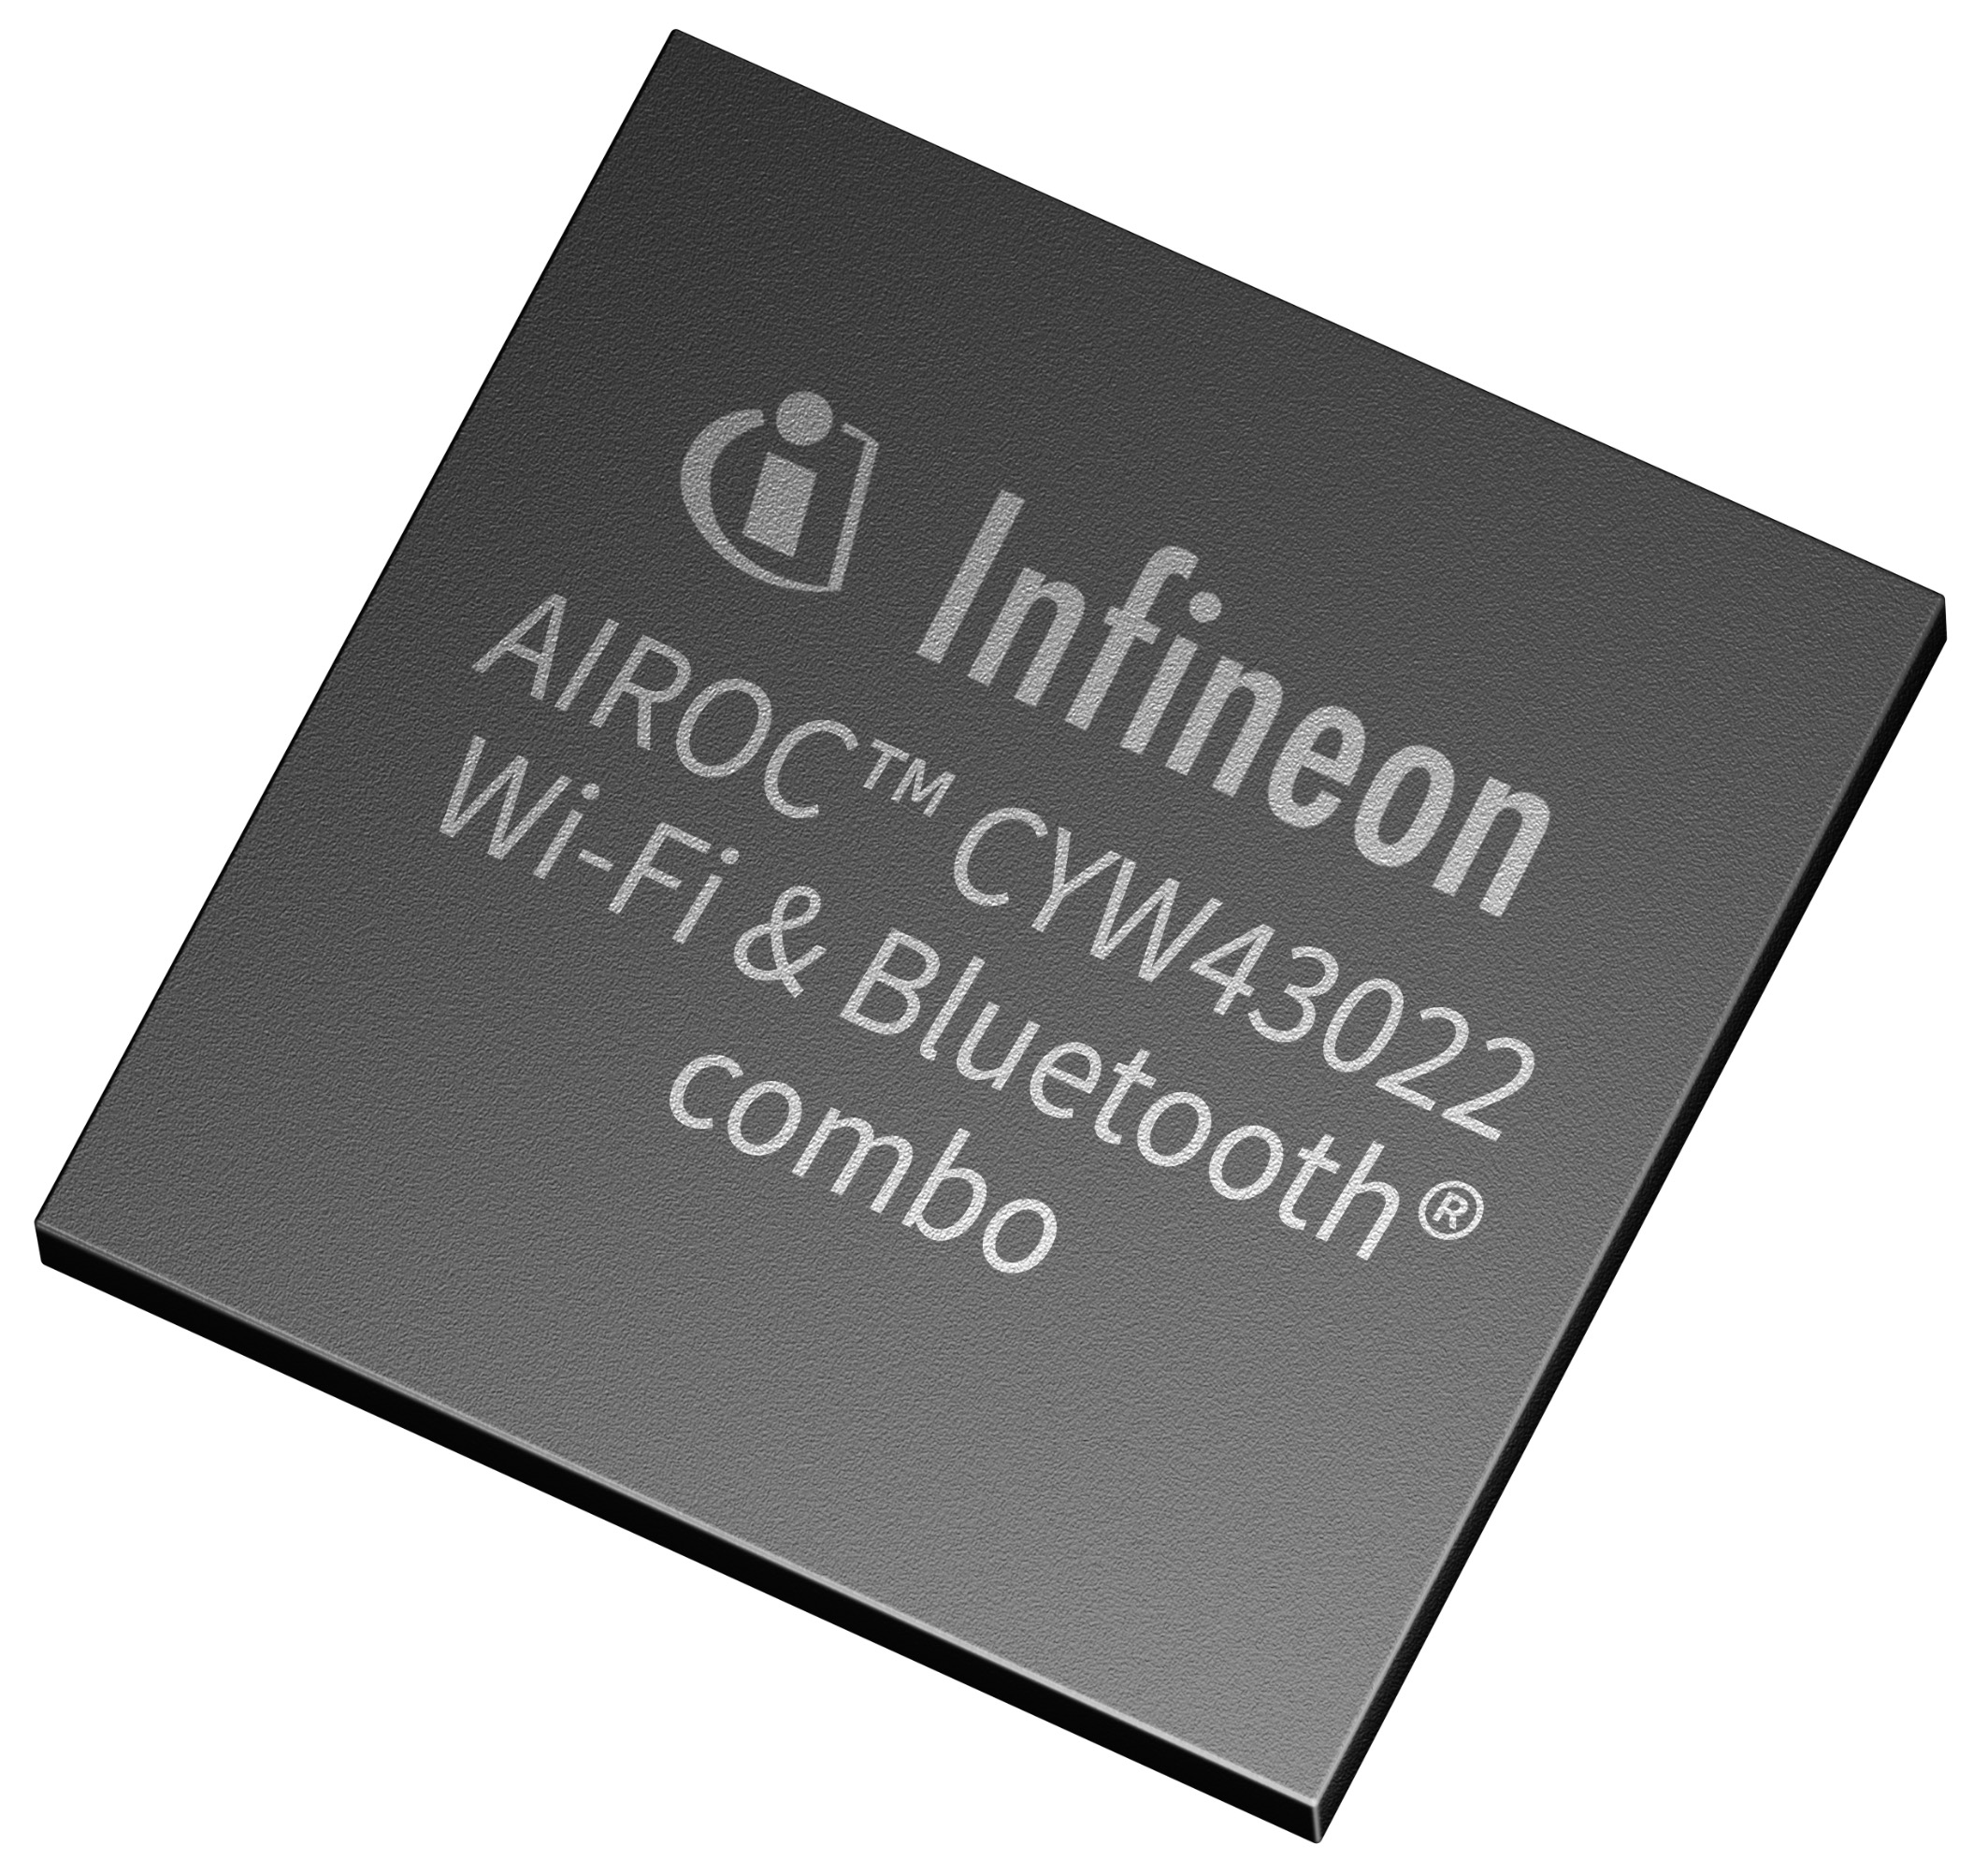 Infineon introduces AIROC™ CYW43022 Wi-Fi 5 and Bluetooth® 2-in-1 product, which reduces power consumption by 65%, significantly extending battery life in IoT applications - Bild